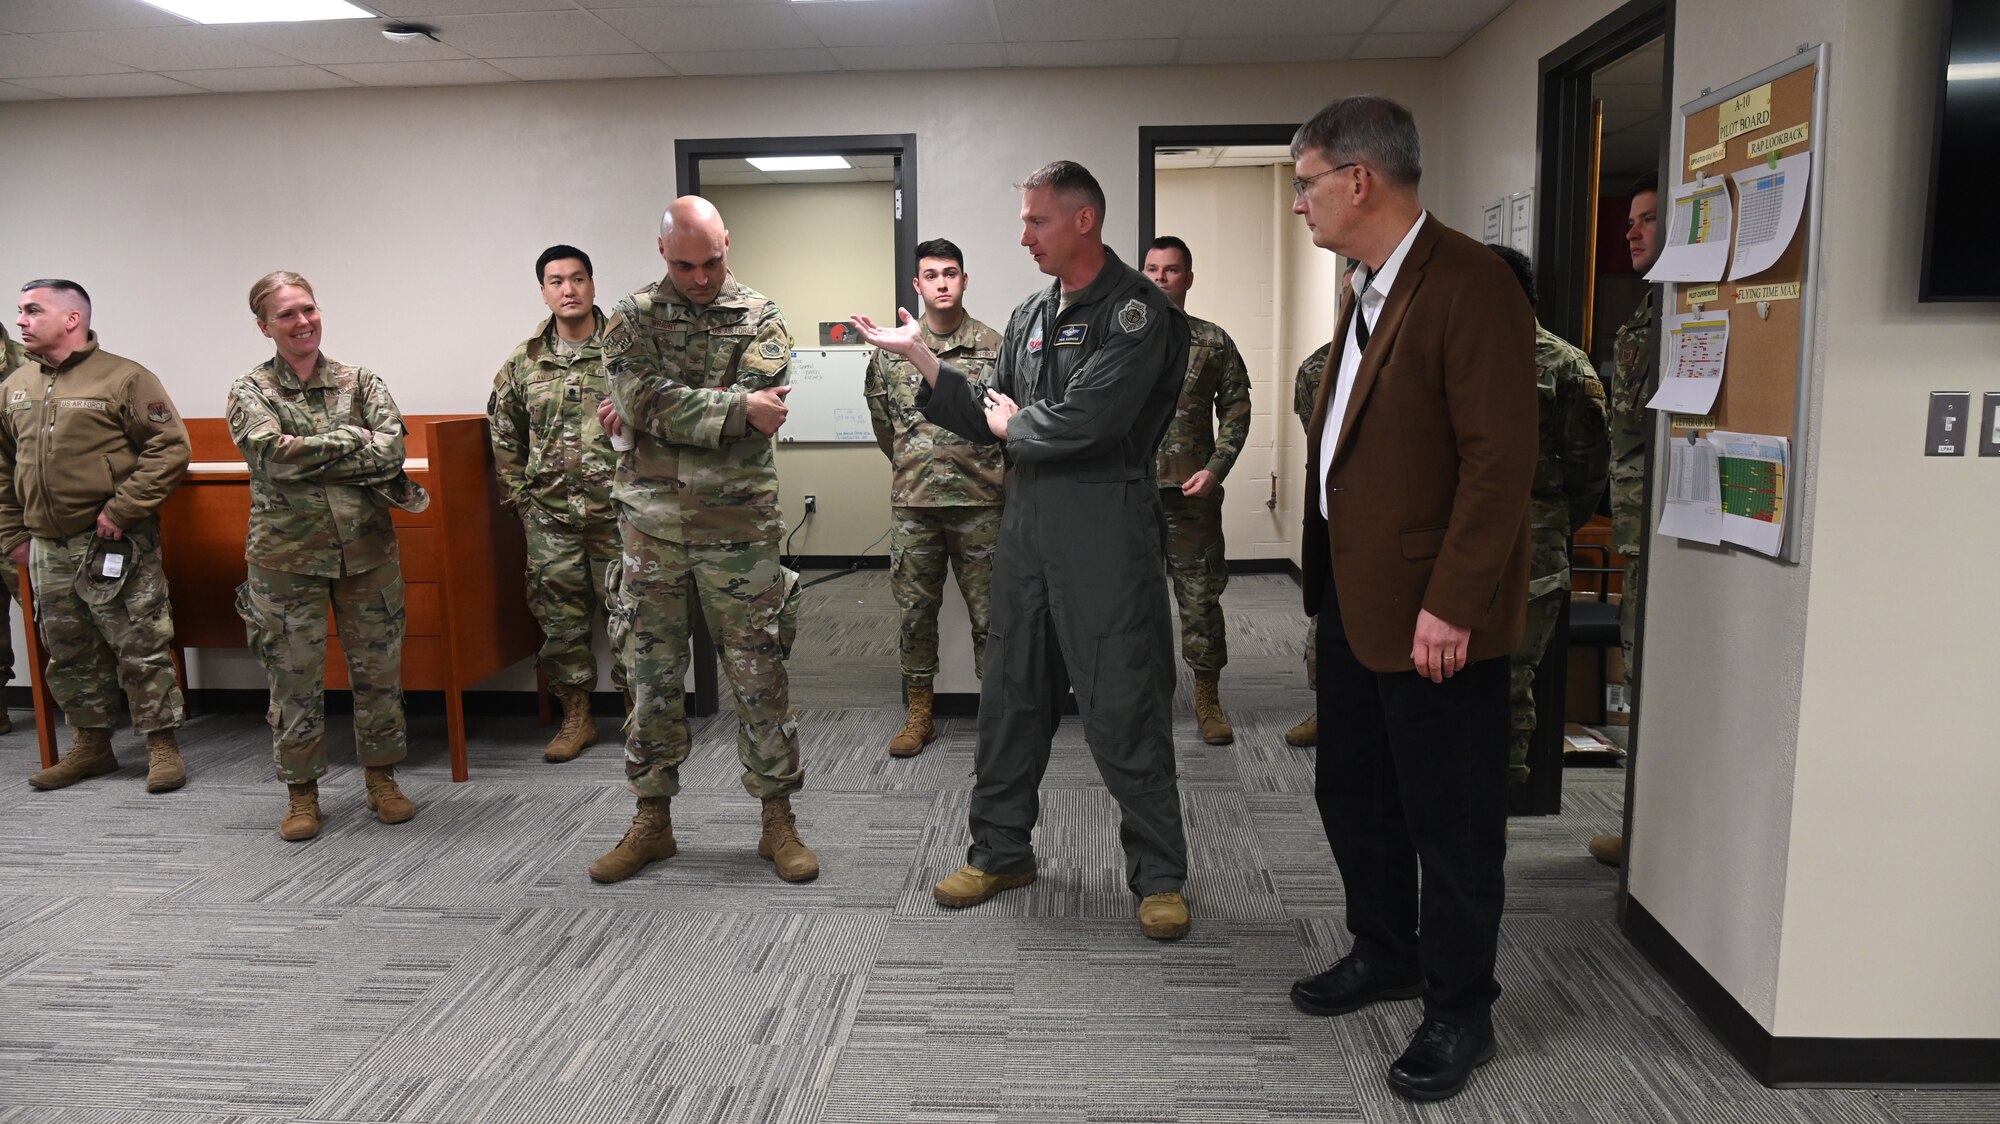 Mr. Devin Cate, right, executive director, Air National Guard, speaks to Airmen with the 175th Operations Group at the 175th Wing, March 5, 2022, during a visit to Warfield Air National Guard Base at Martin State Airport, Middle River, Maryland.  Cate visited many squadrons and groups during his time on base. (U.S. Air National Guard photo by A1C Alexandra Huettner)